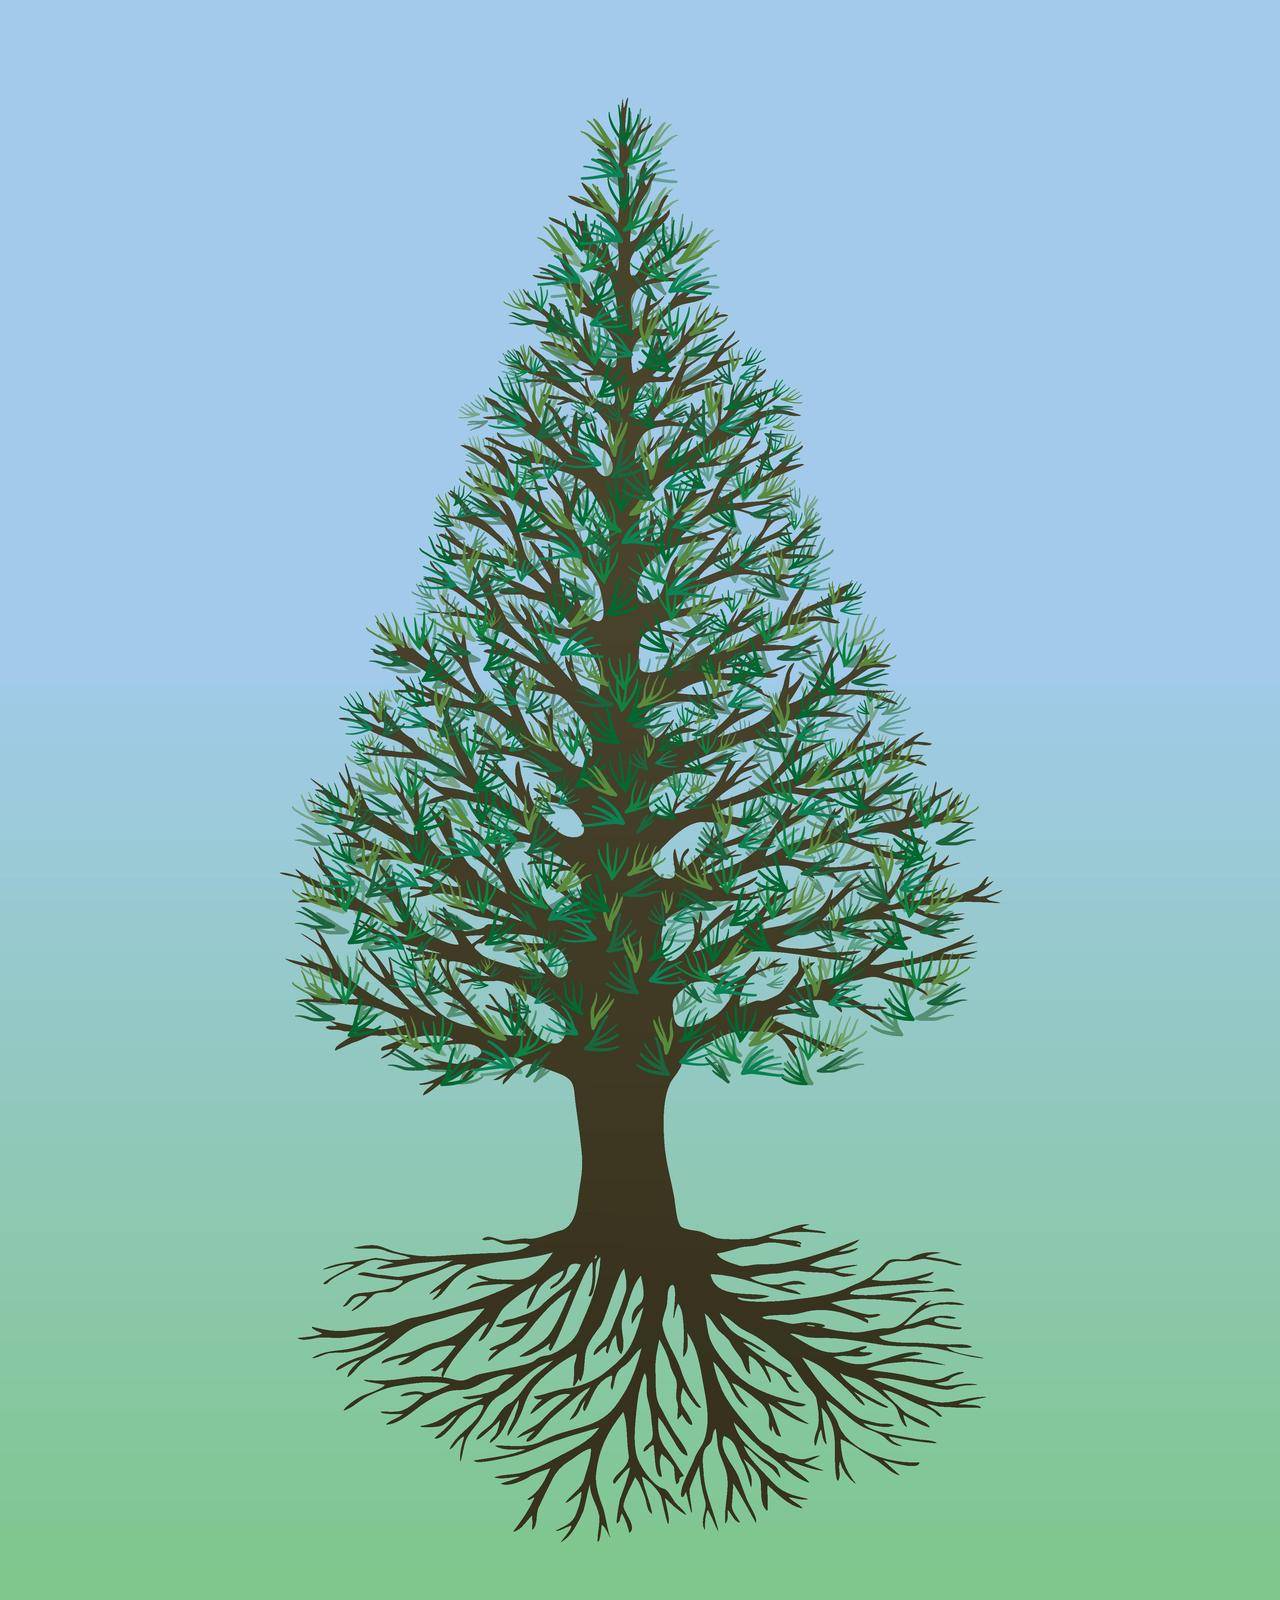 A vector illustration of a tree of life or yggdrasil with pine needles. The tree has a pointed shape.